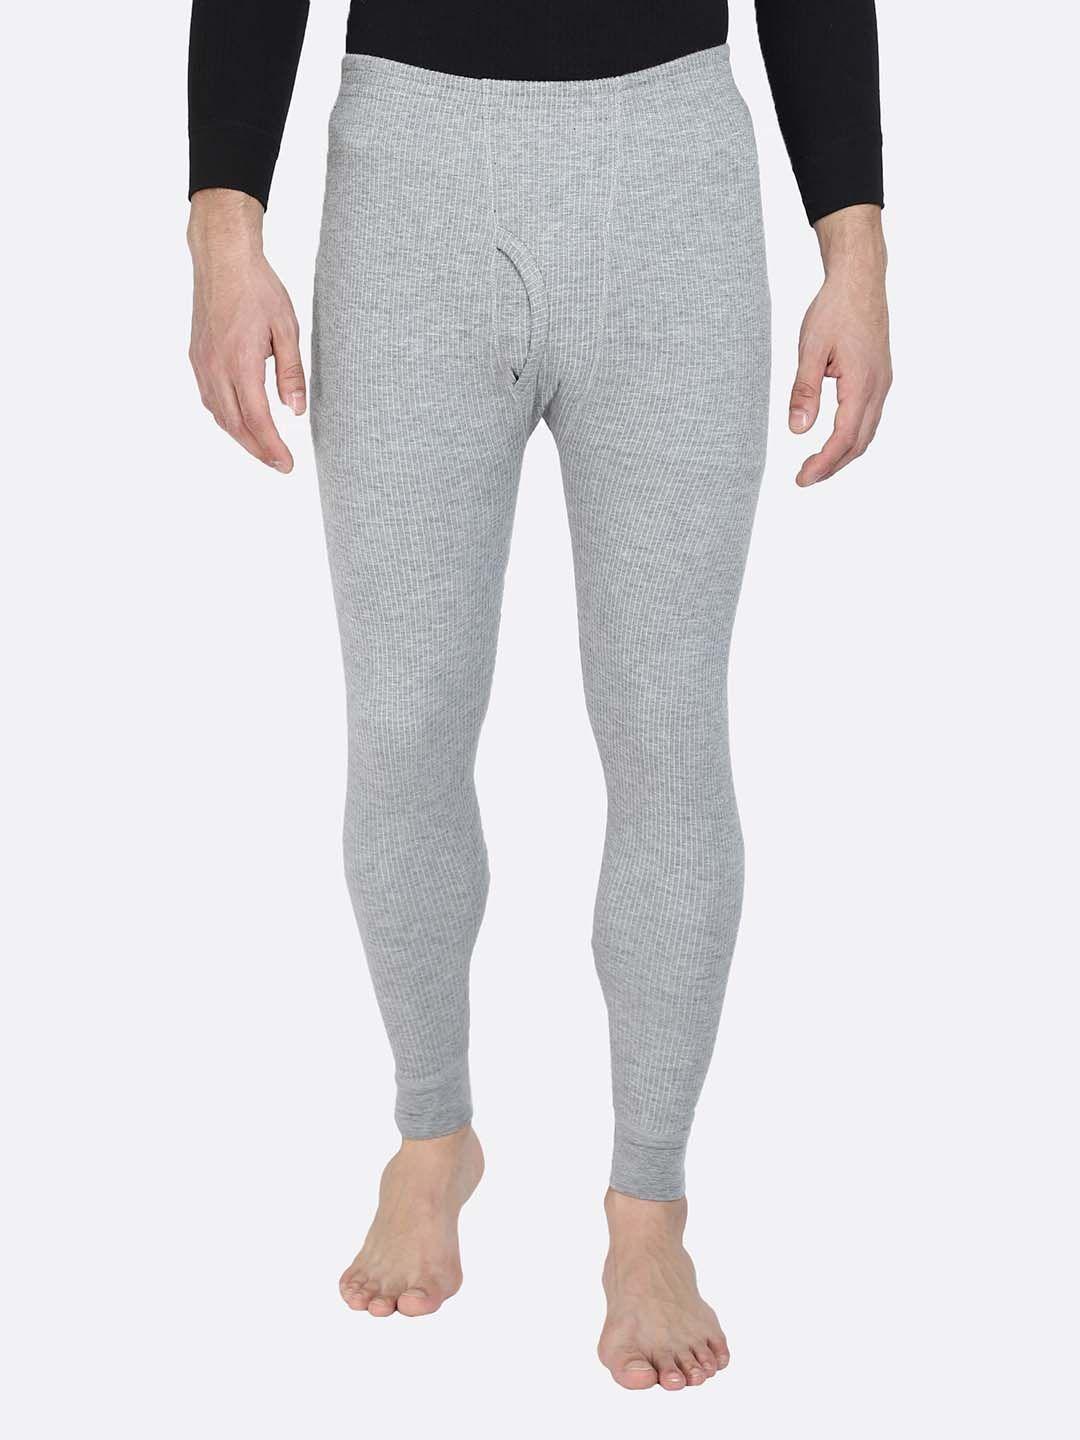 bodycare insider men grey solid cotton thermal bottoms